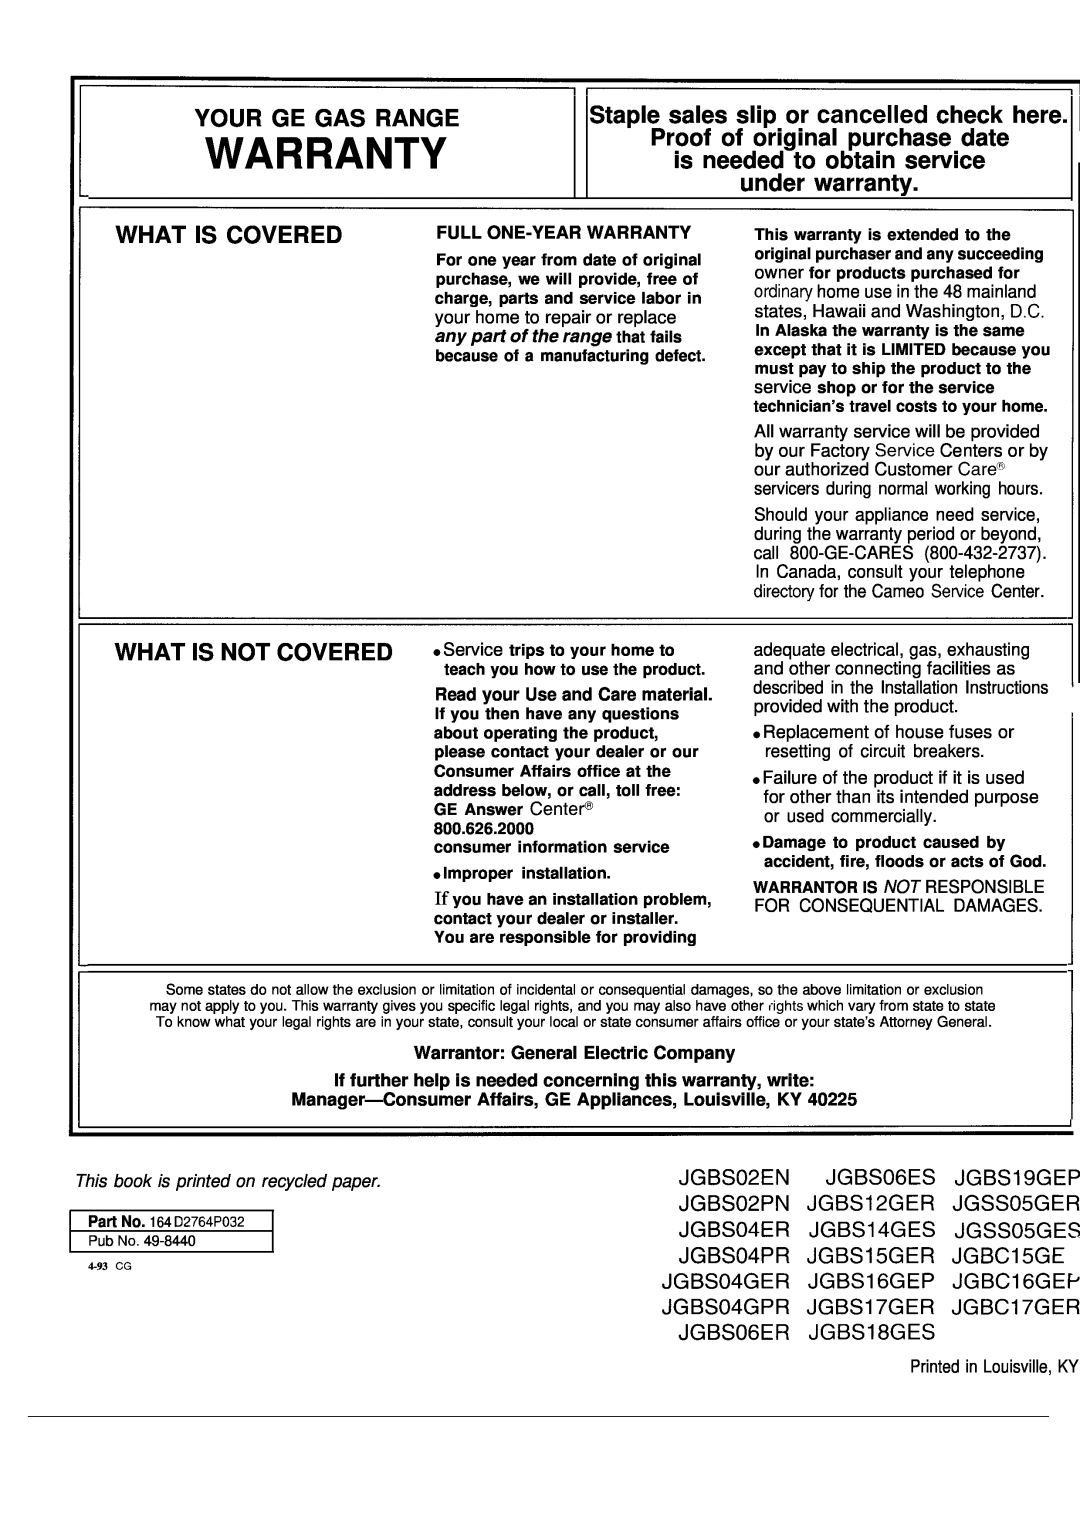 GE JGBS16GEP manual Your Ge Gas Range, Staple sales slip or cancelled check here, under warranty, What Is Covered, Warranty 